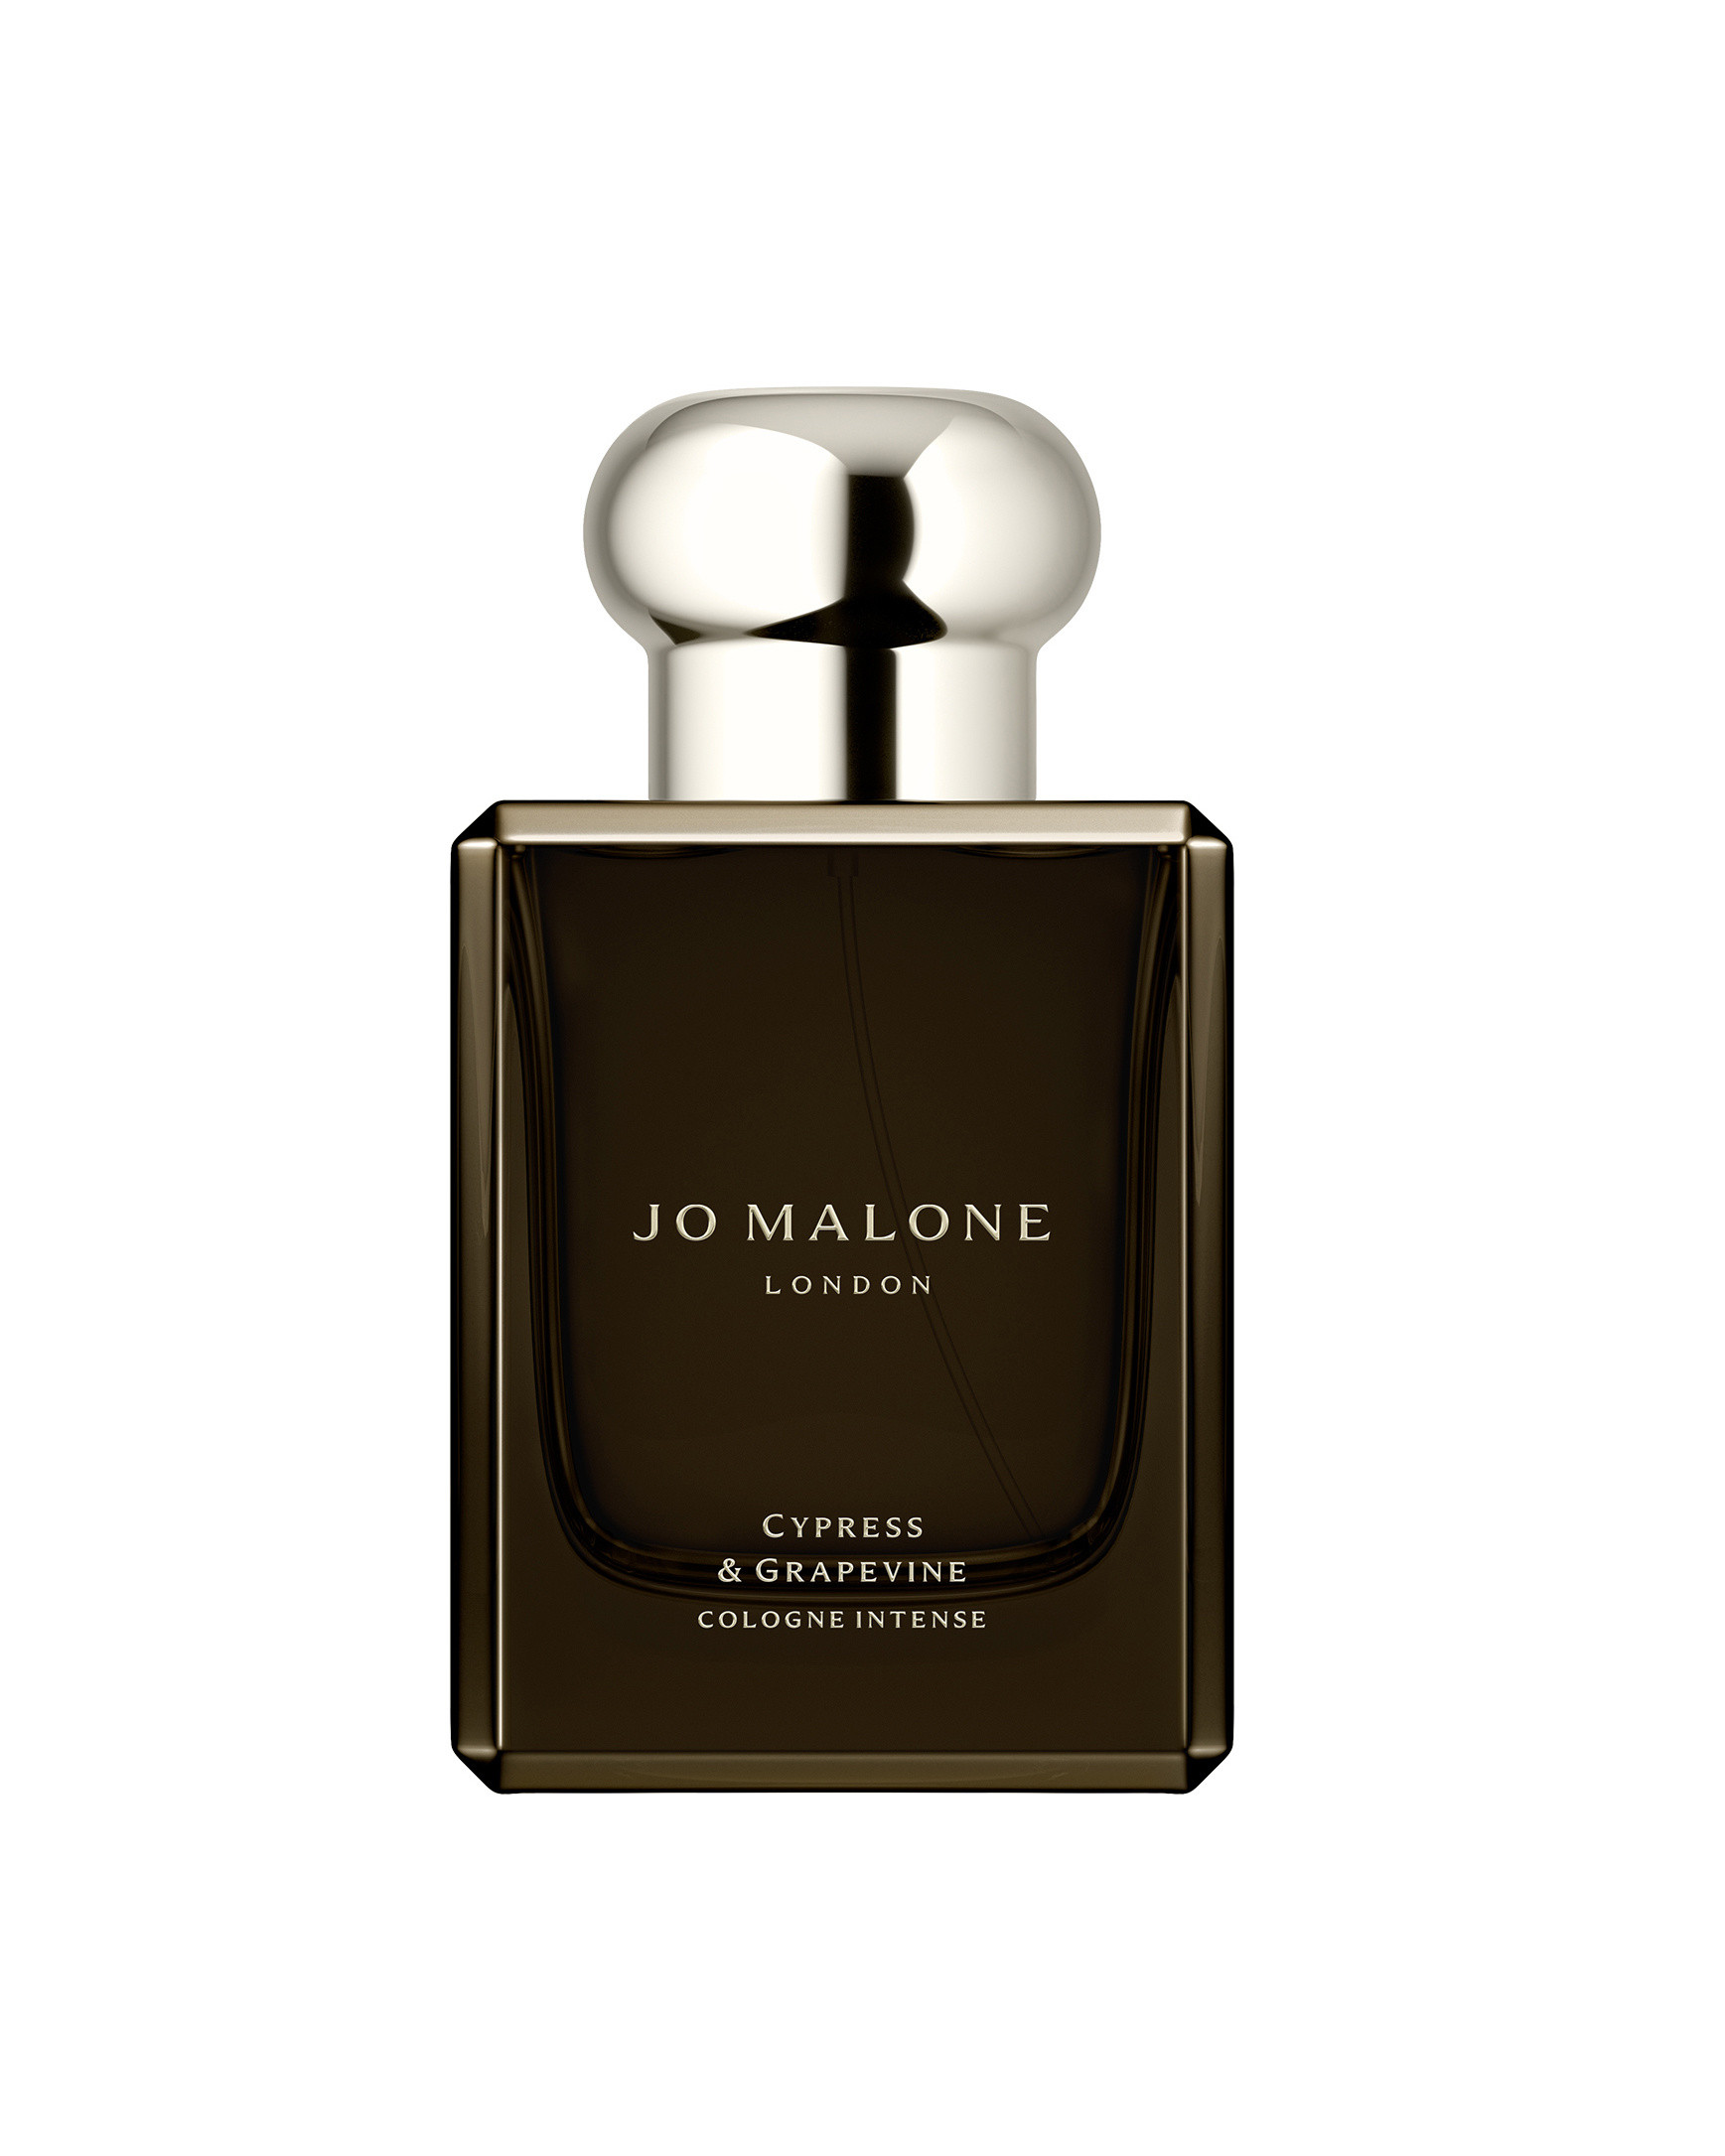 Jo Malone Cypress & Grapevine Cologne Intense 50 ml, Marrone, large image number 0